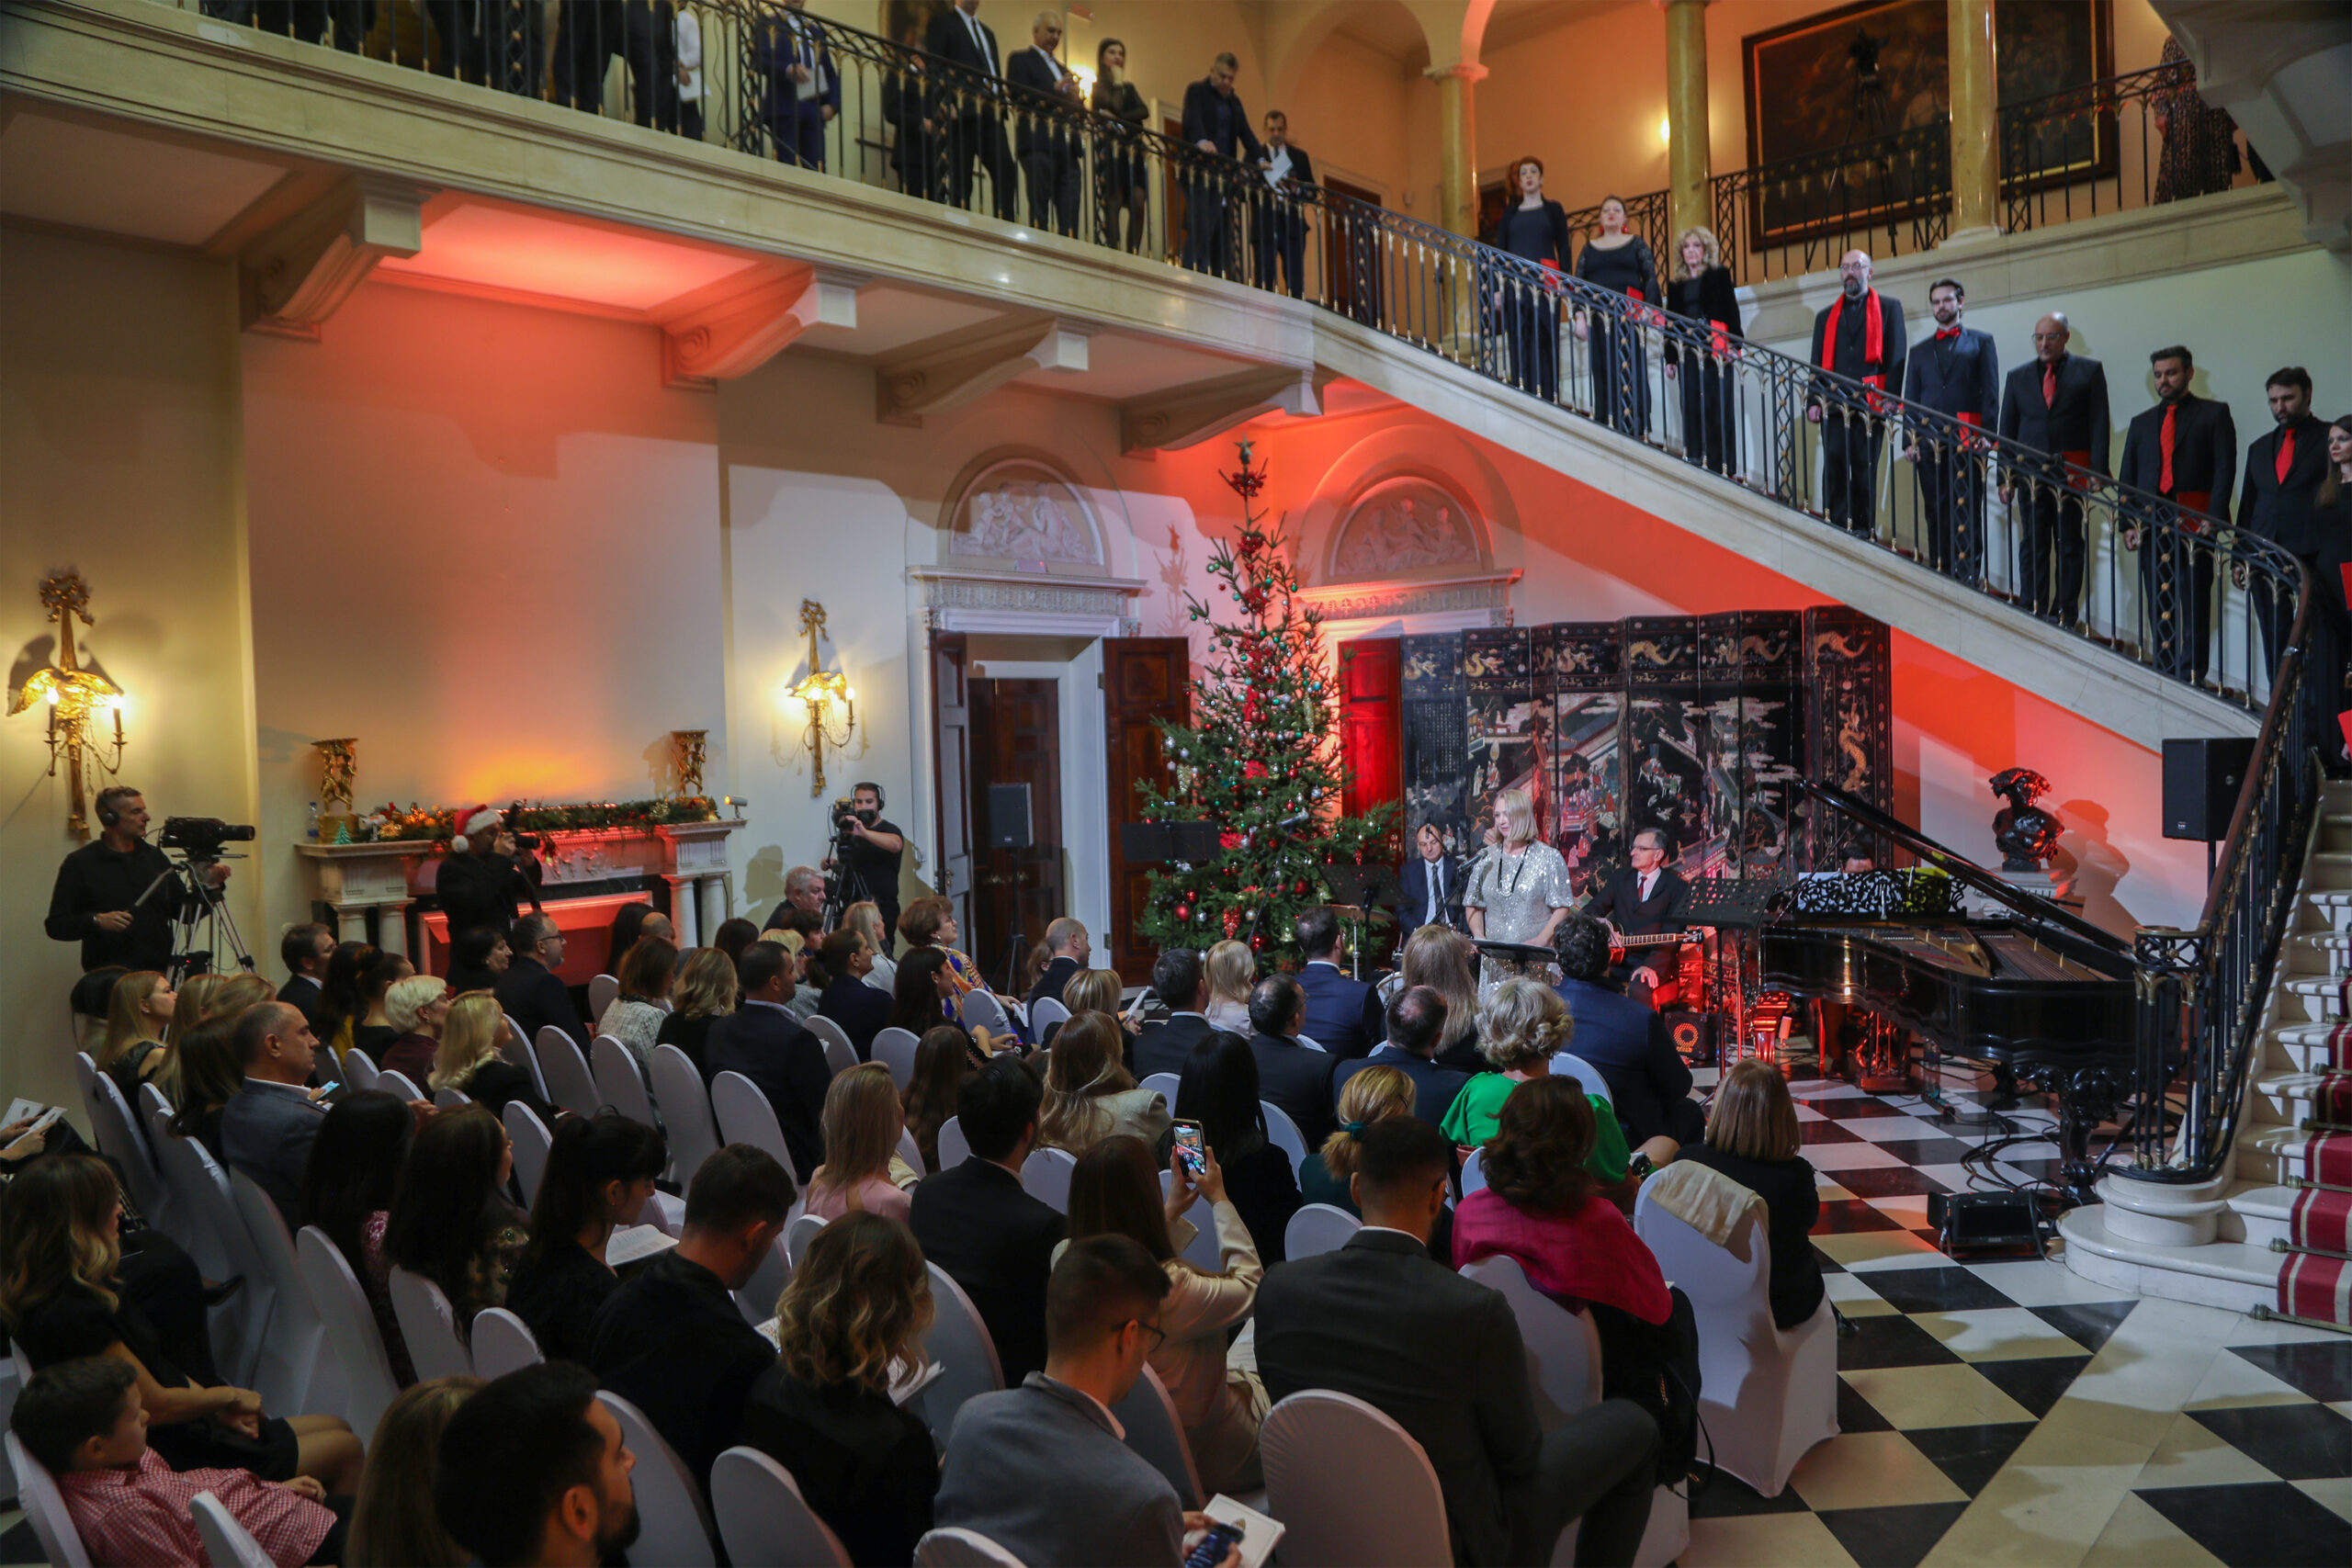 Christmas reception and carols from the White Palace